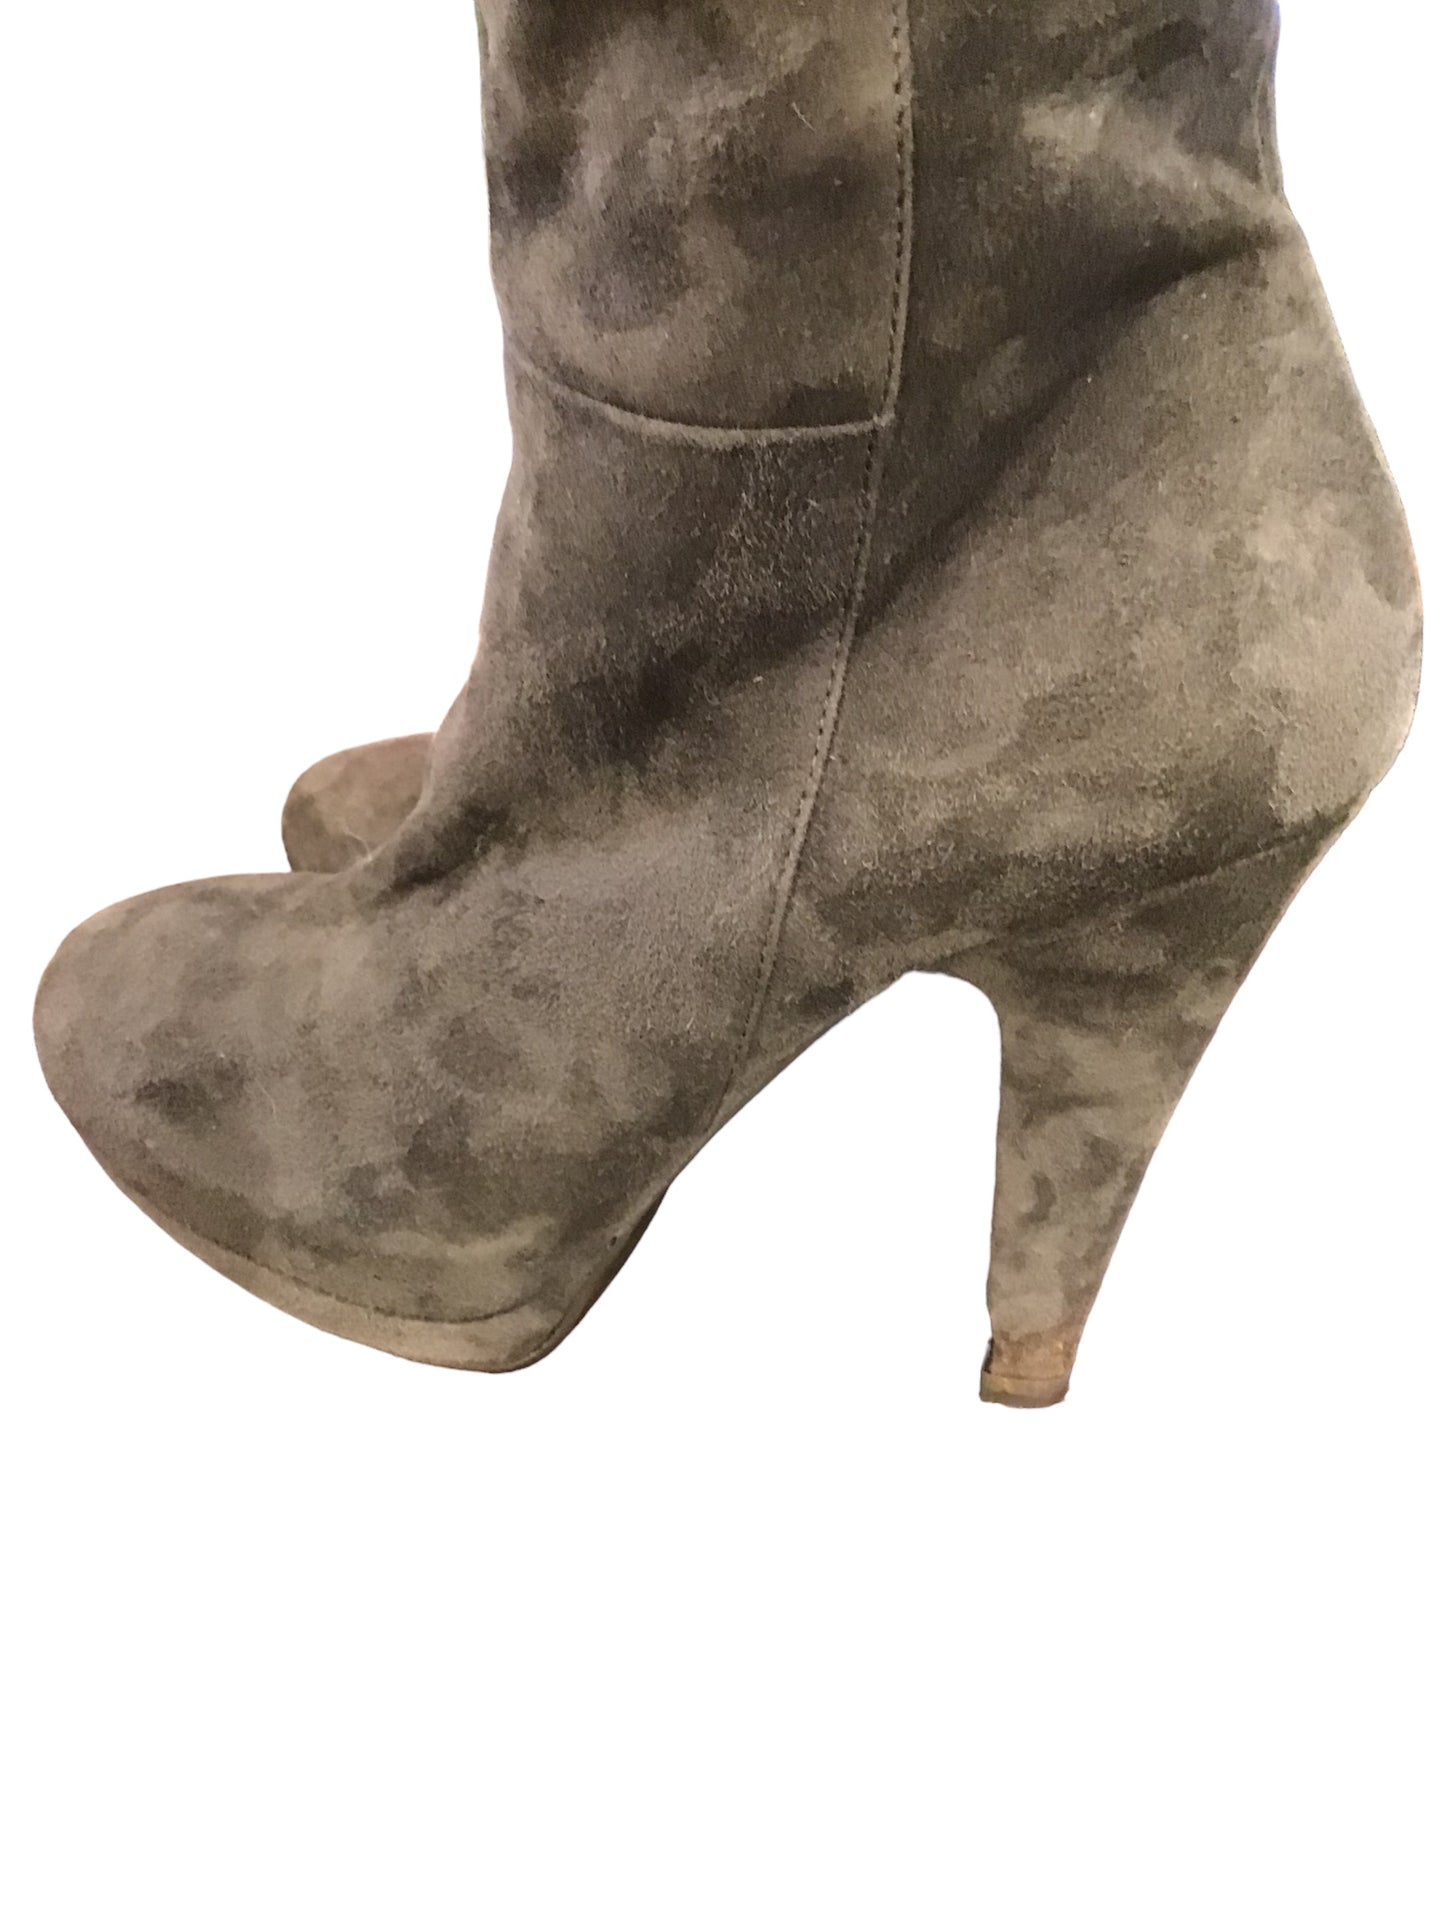 Grey suede heeled boots (UK size 5